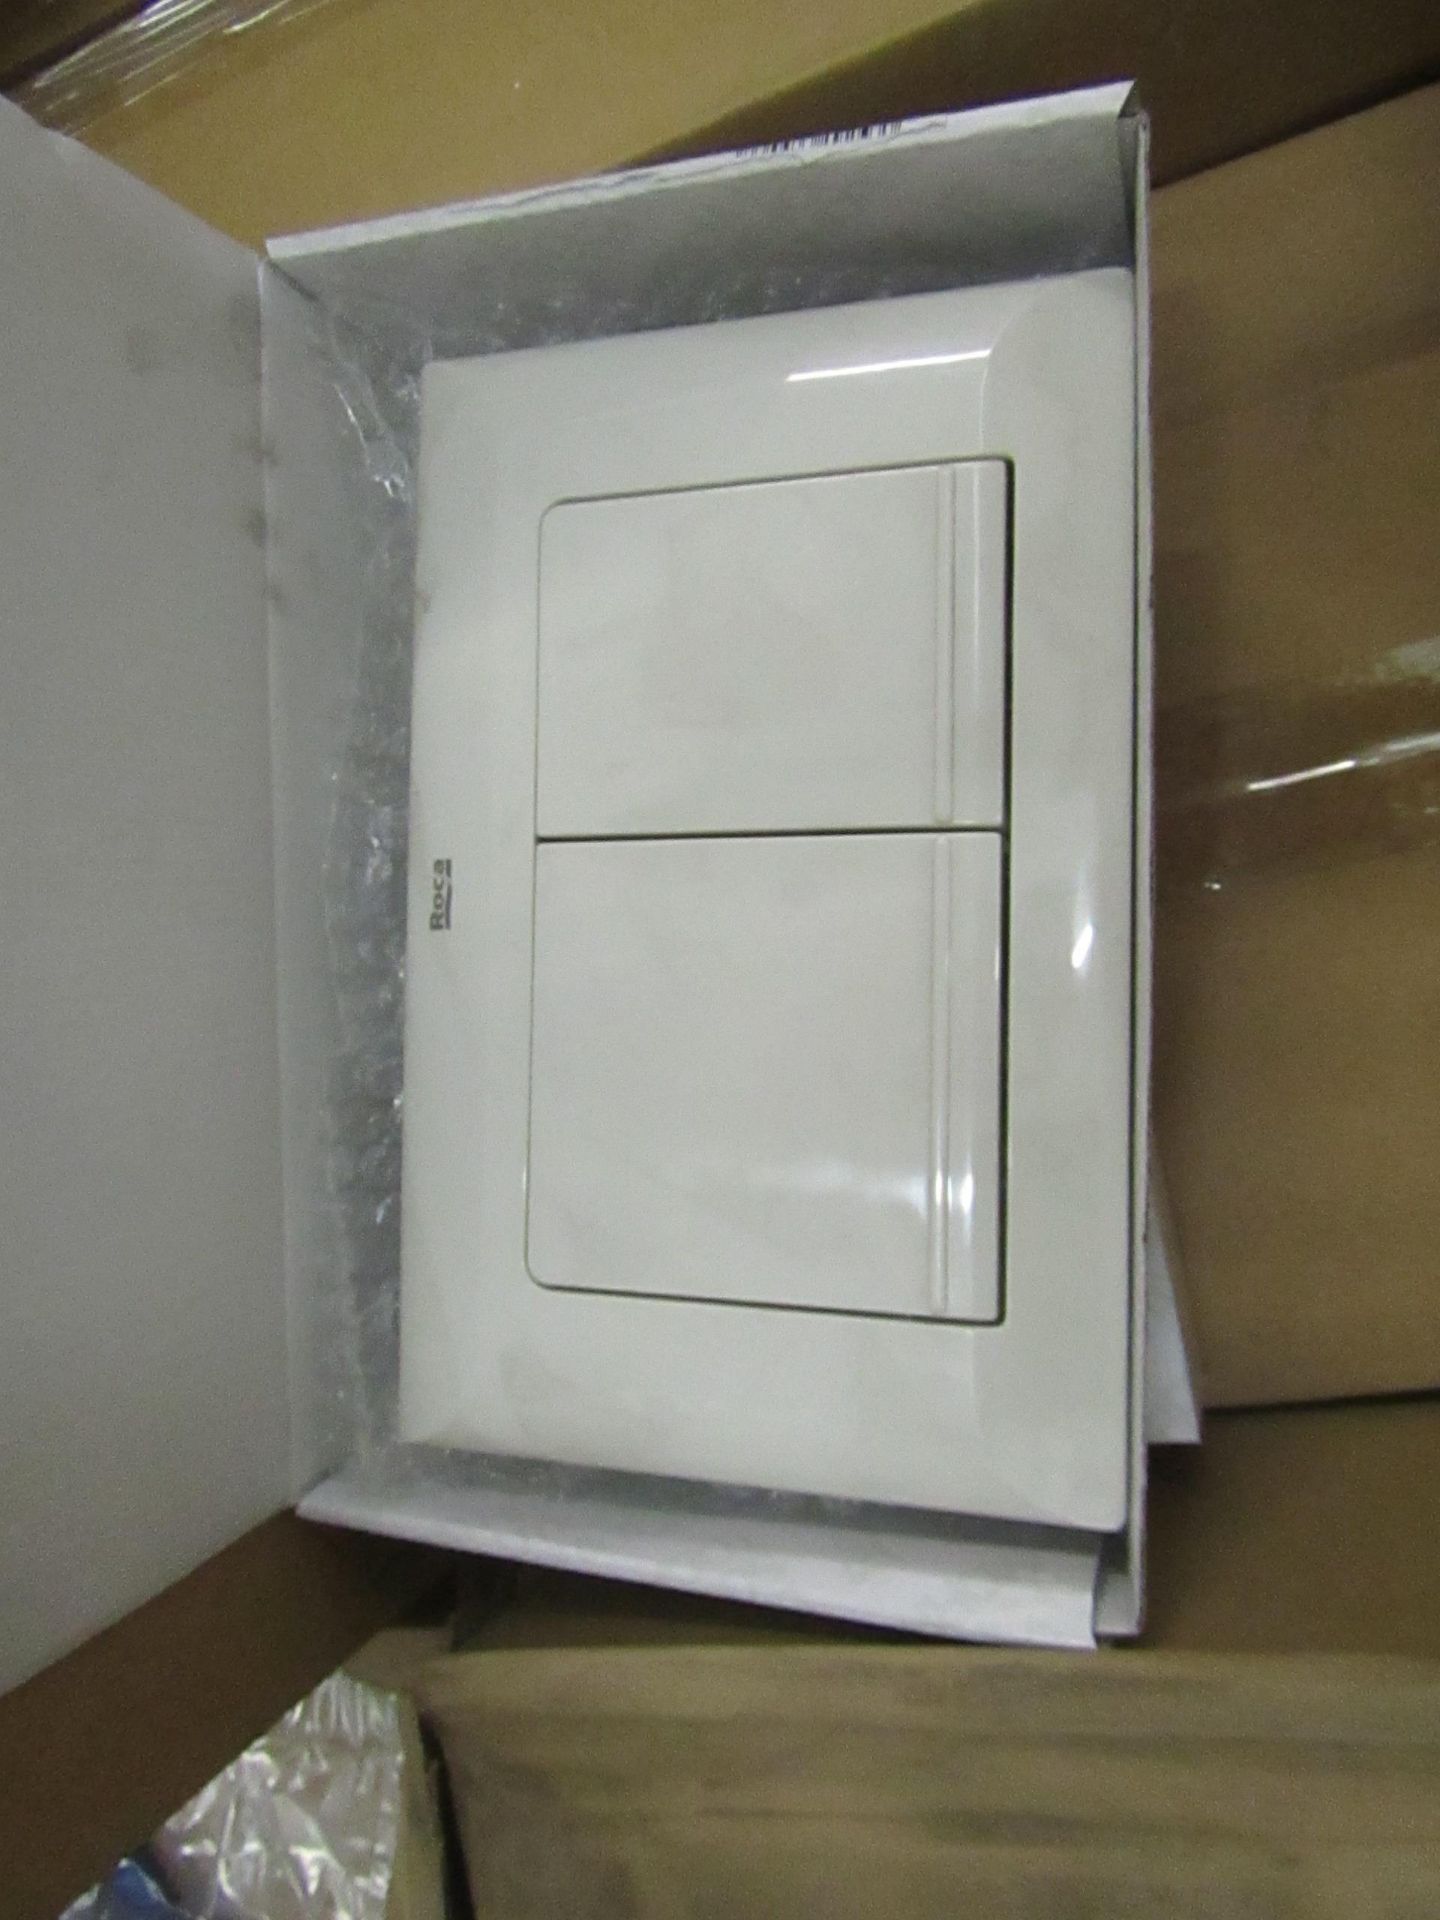 Box of 10x Roca L1 White Toilet flush plates, new and boxed, Total RRP for the lot is Circa £225